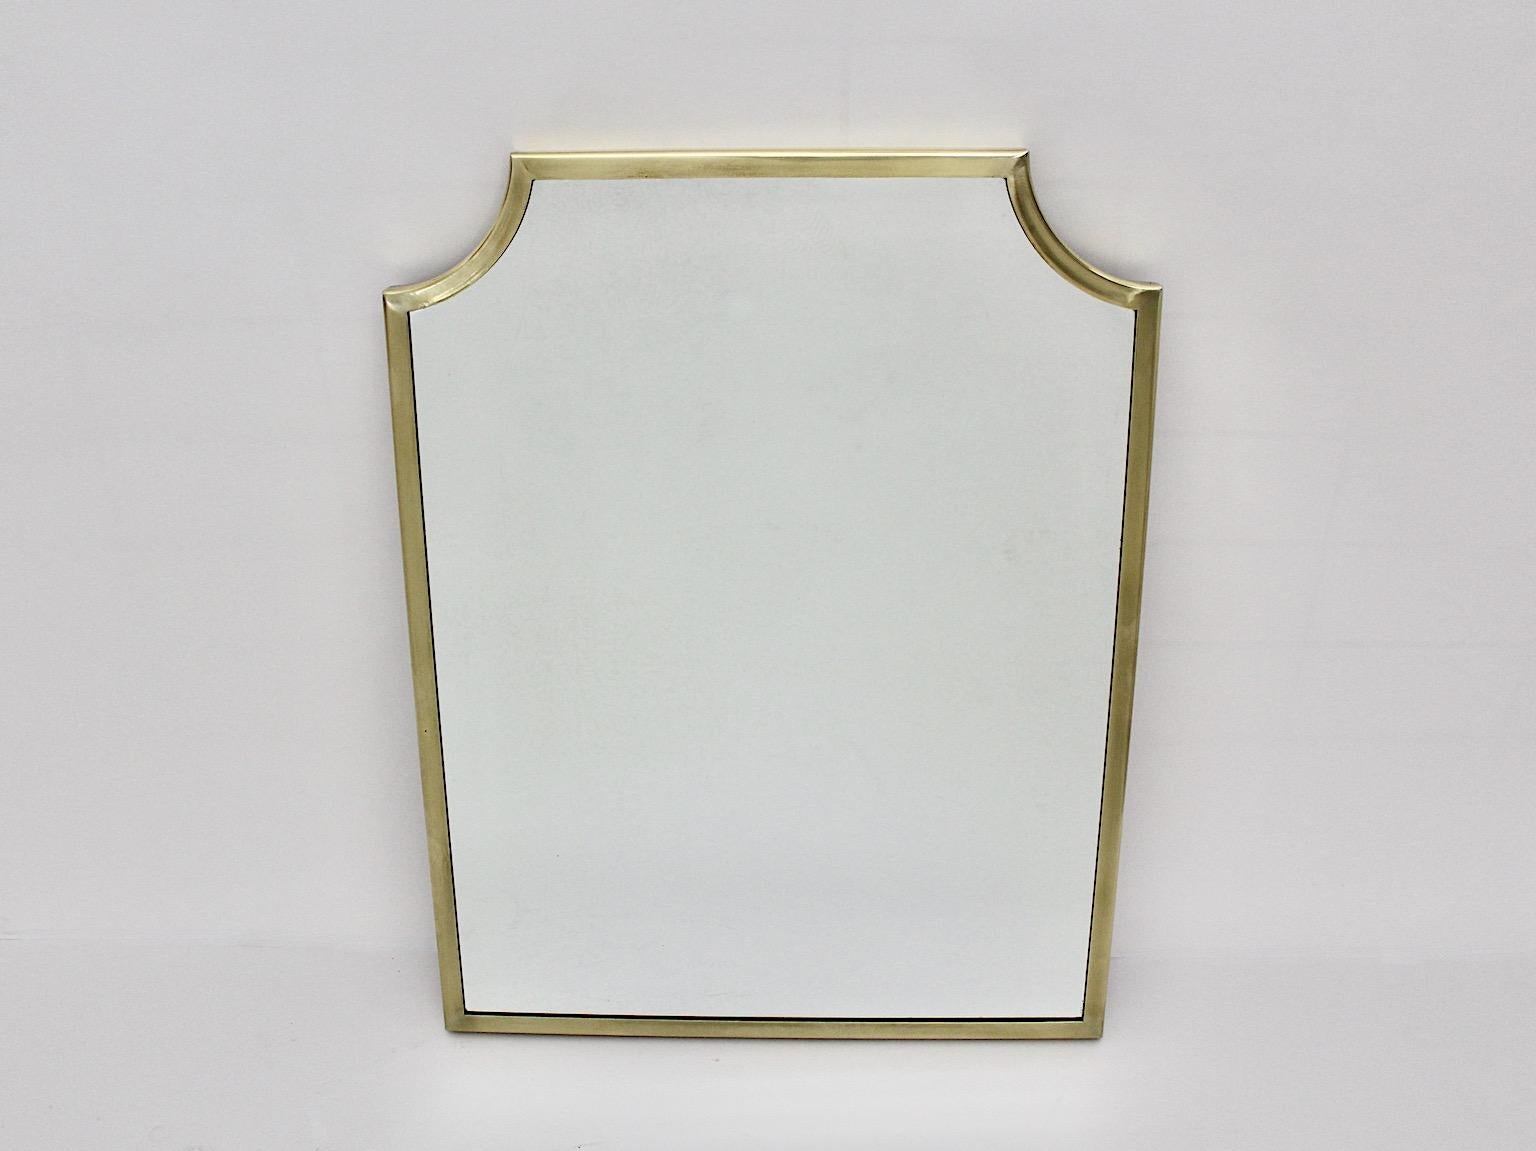 Mid-Century Modern vintage wall mirror from brass in rectangular form 1950s Italy.
A sophisticated wall mirror with brass handmade frame in rare rectangular form with slightly curved corners in a luscious golden tone. 
While the brass frame shows